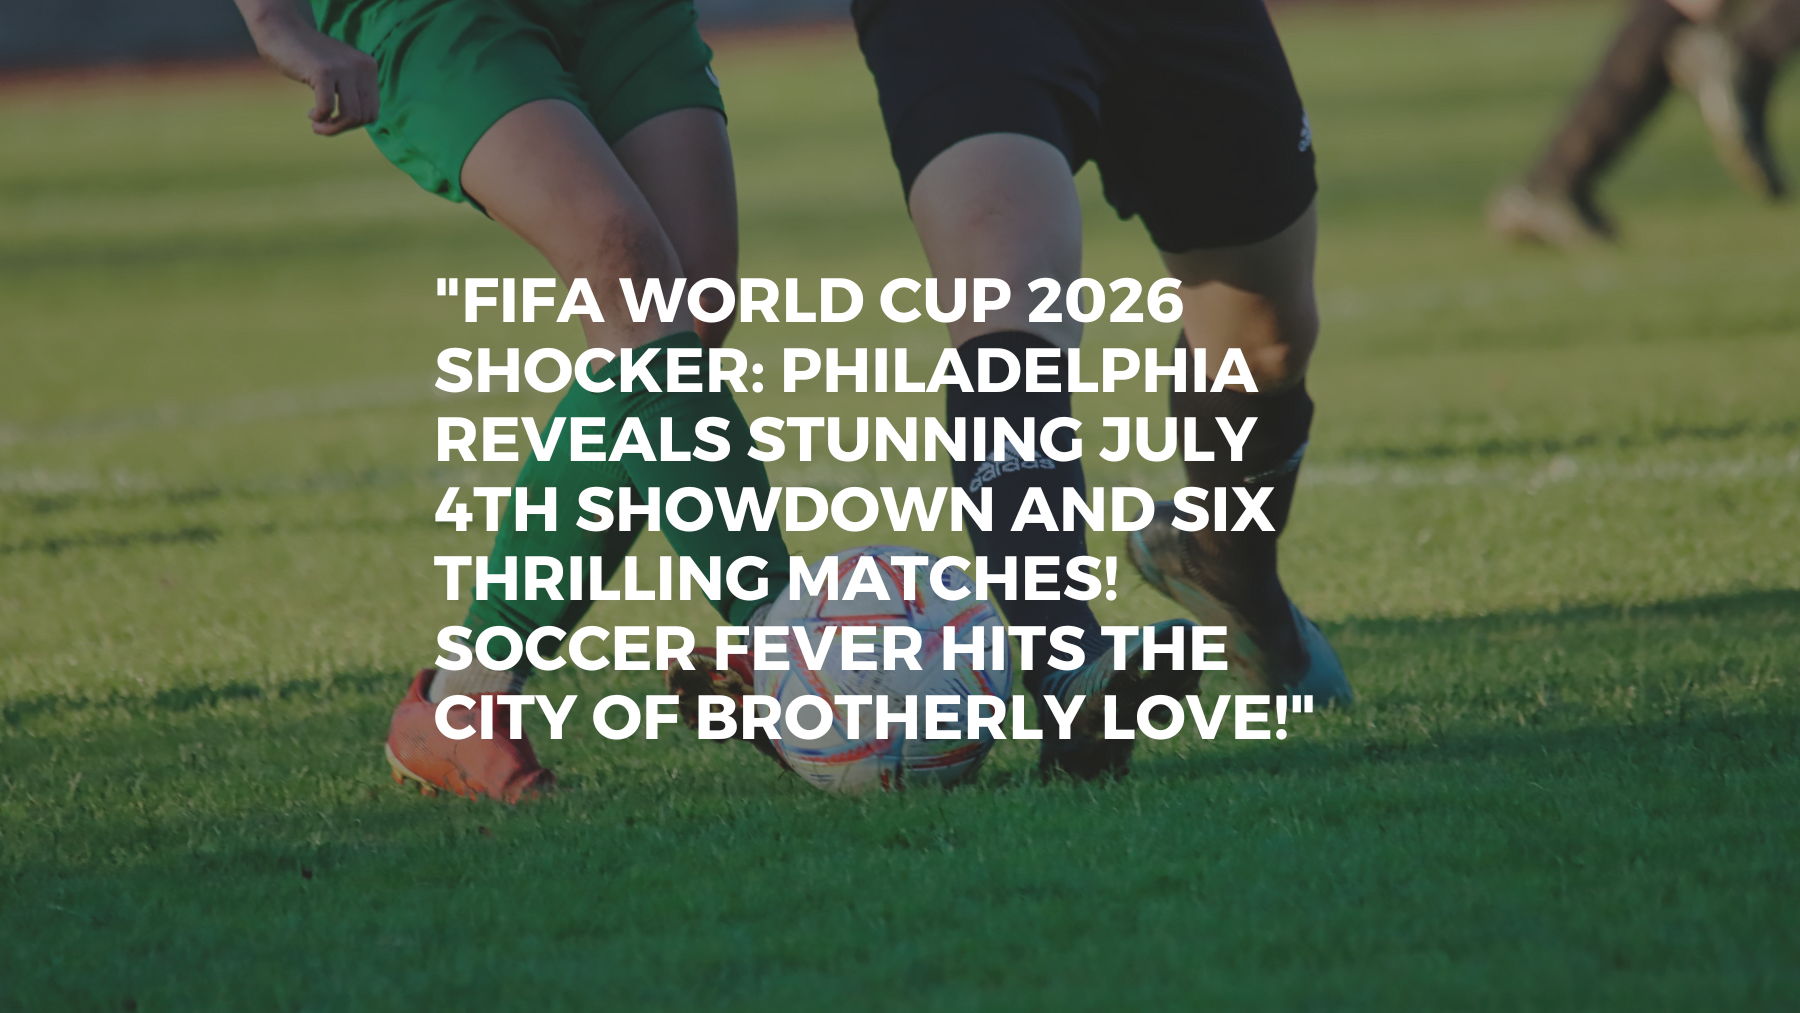 "FIFA World Cup 2026 Shocker: Philadelphia Reveals Stunning July 4th Showdown and Six Thrilling Matches! Soccer Fever Hits the City of Brotherly Love!"